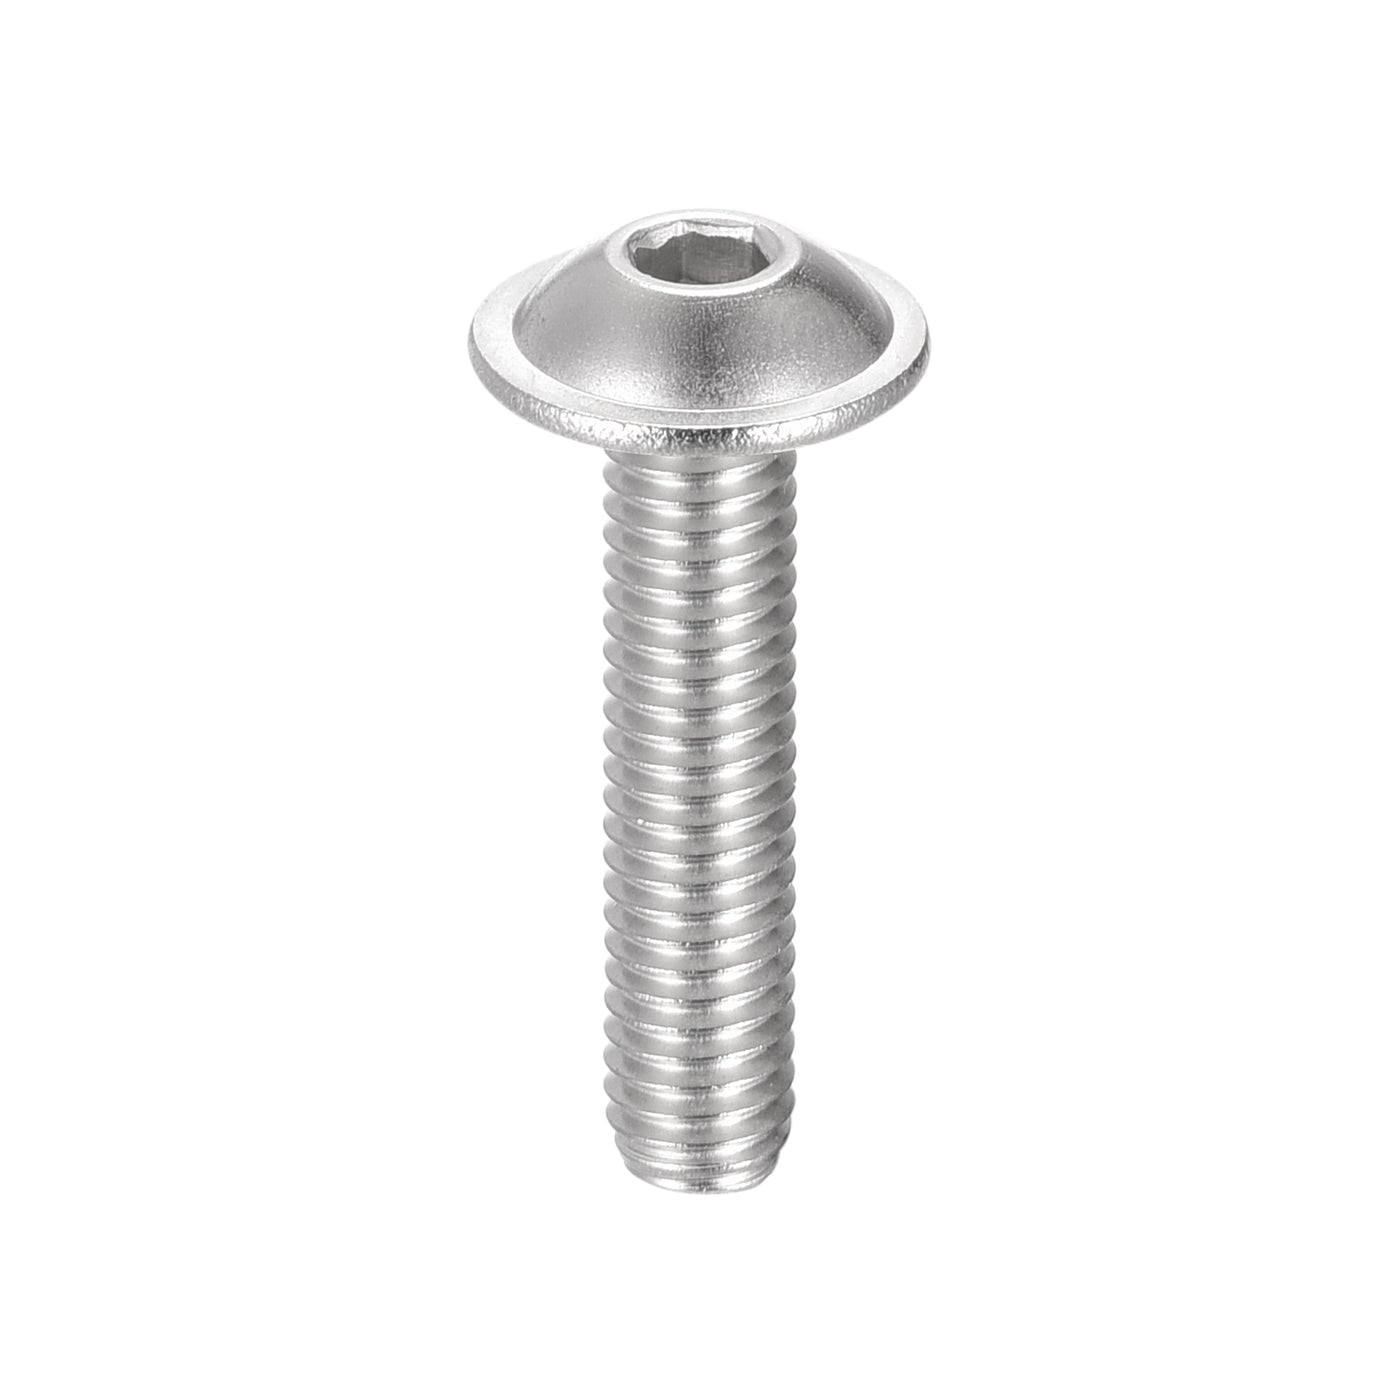 Uxcell Uxcell M5x40mm 304 Stainless Steel Flanged Button Head Socket Cap Screws 25pcs